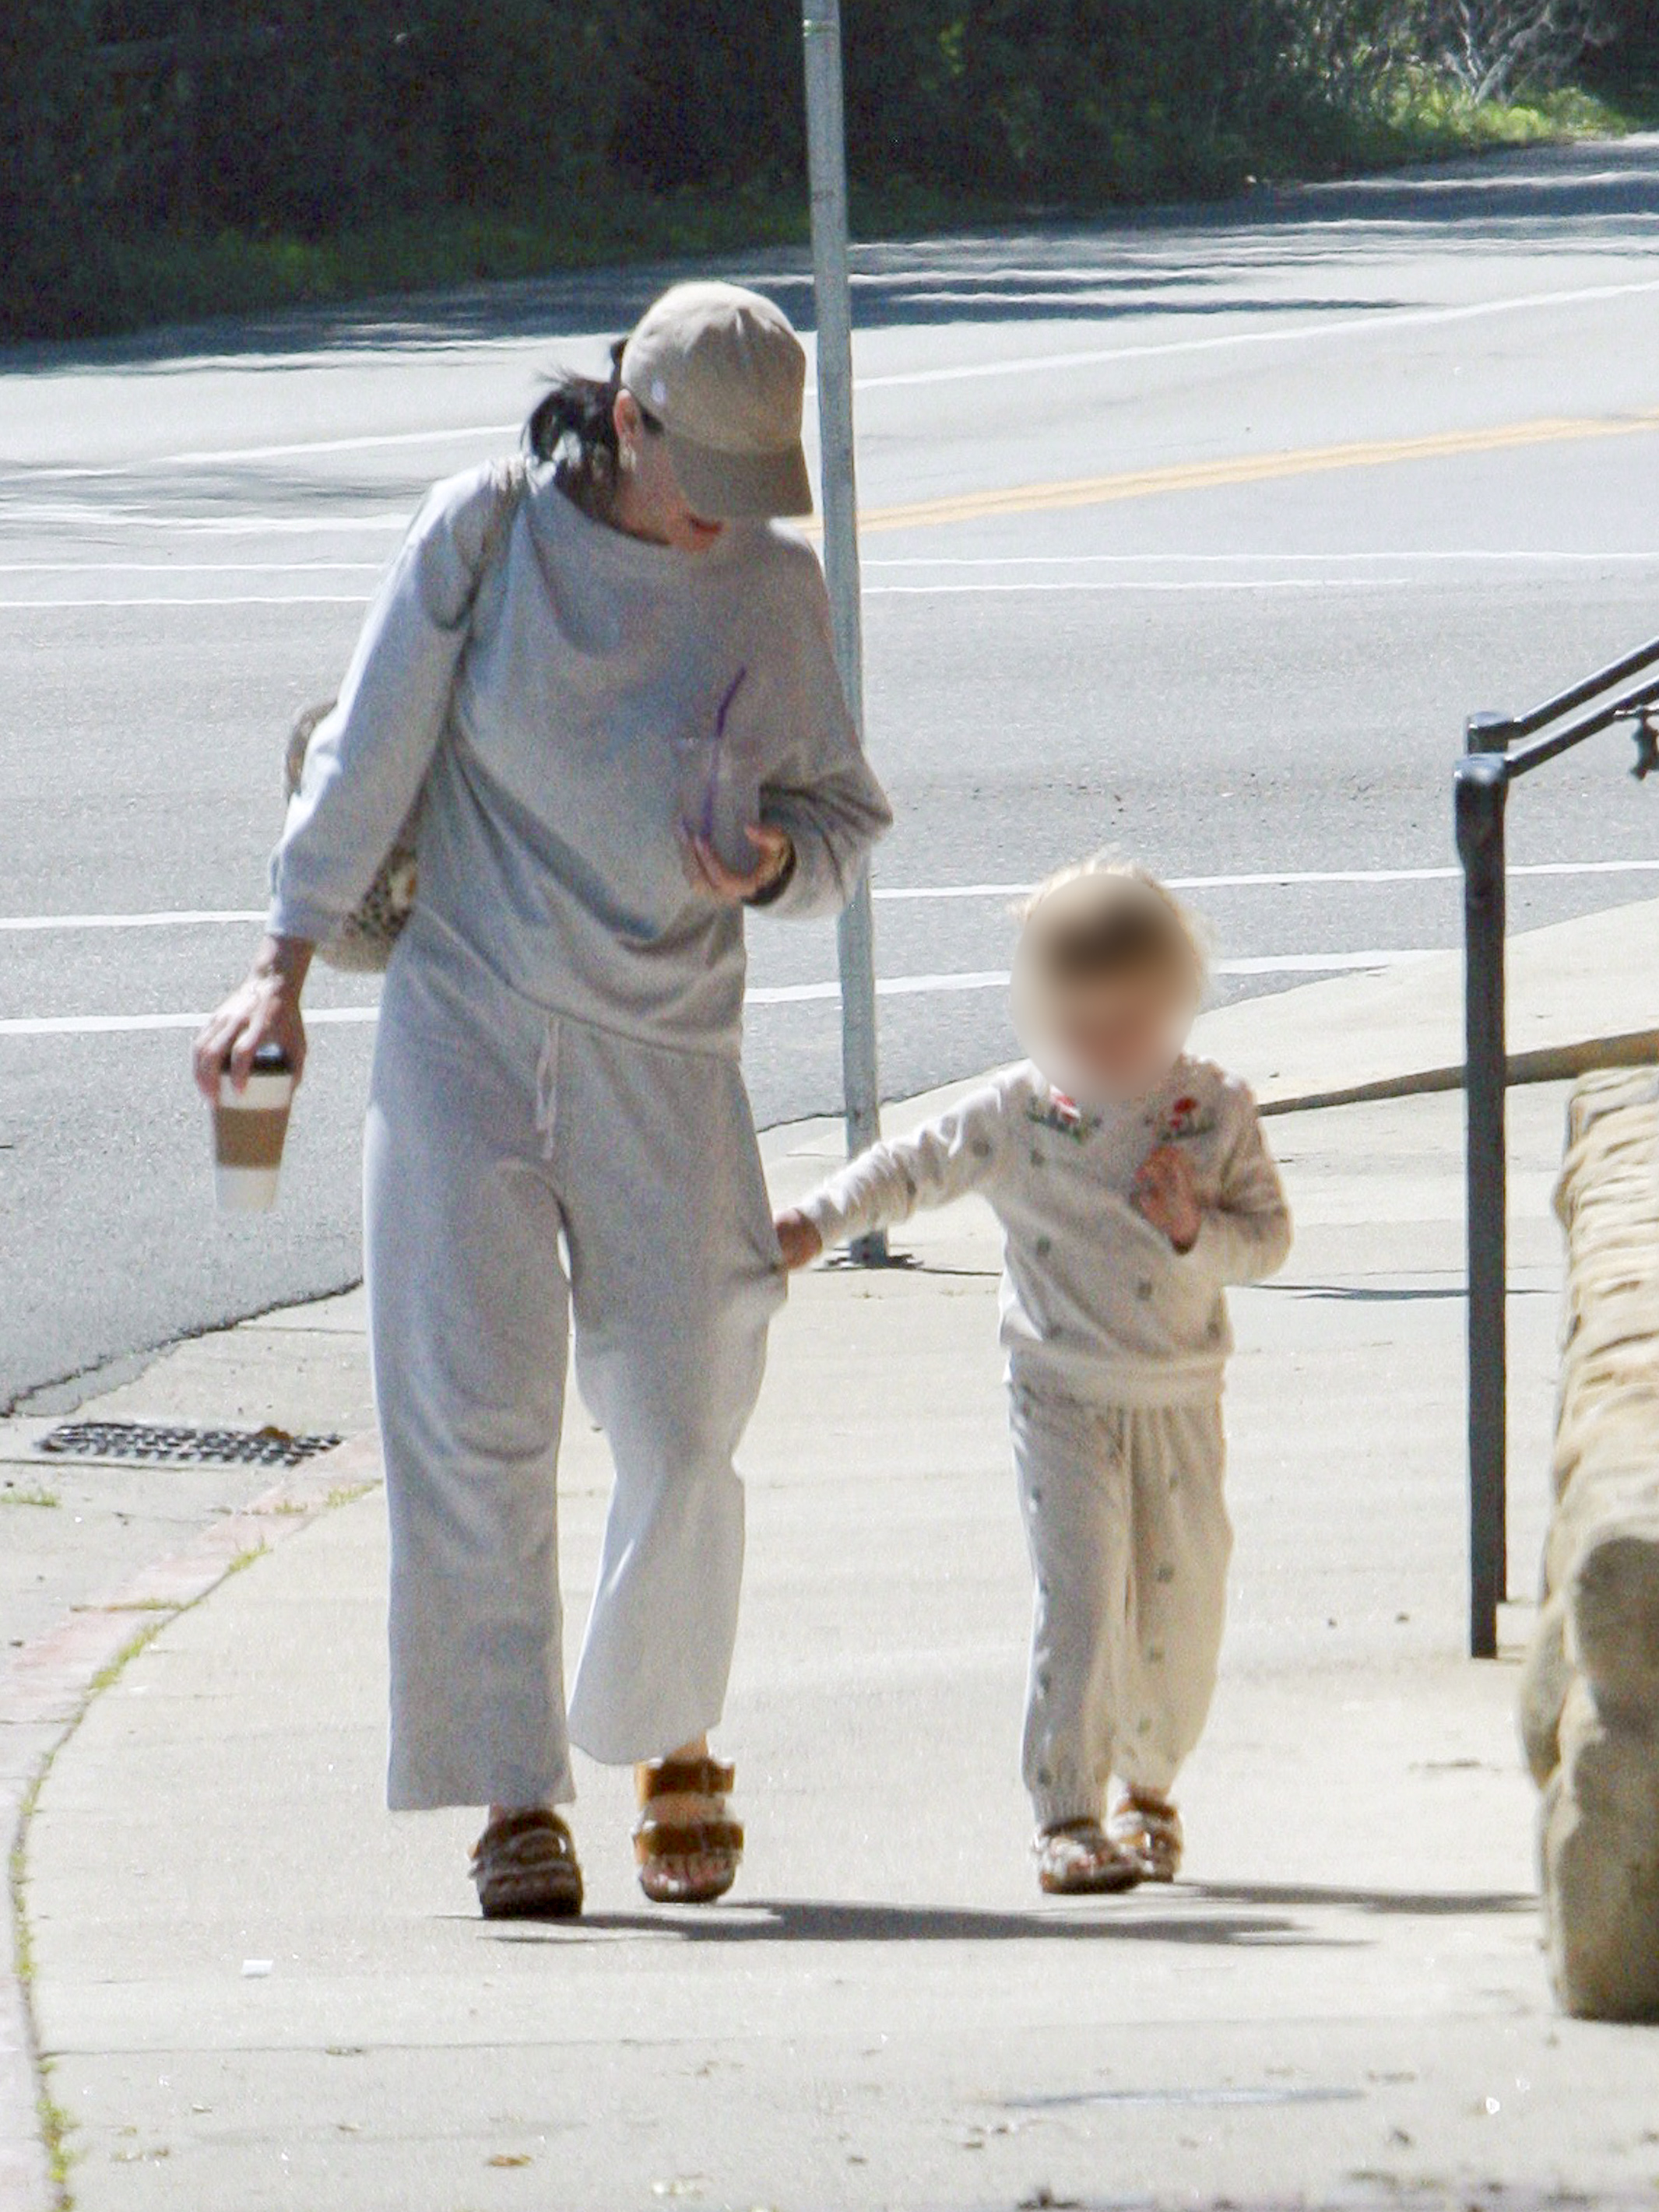 Katy and her three-year-old daughter stepped out for brunch at a popular spot in the Upper Village area of Montecito, California